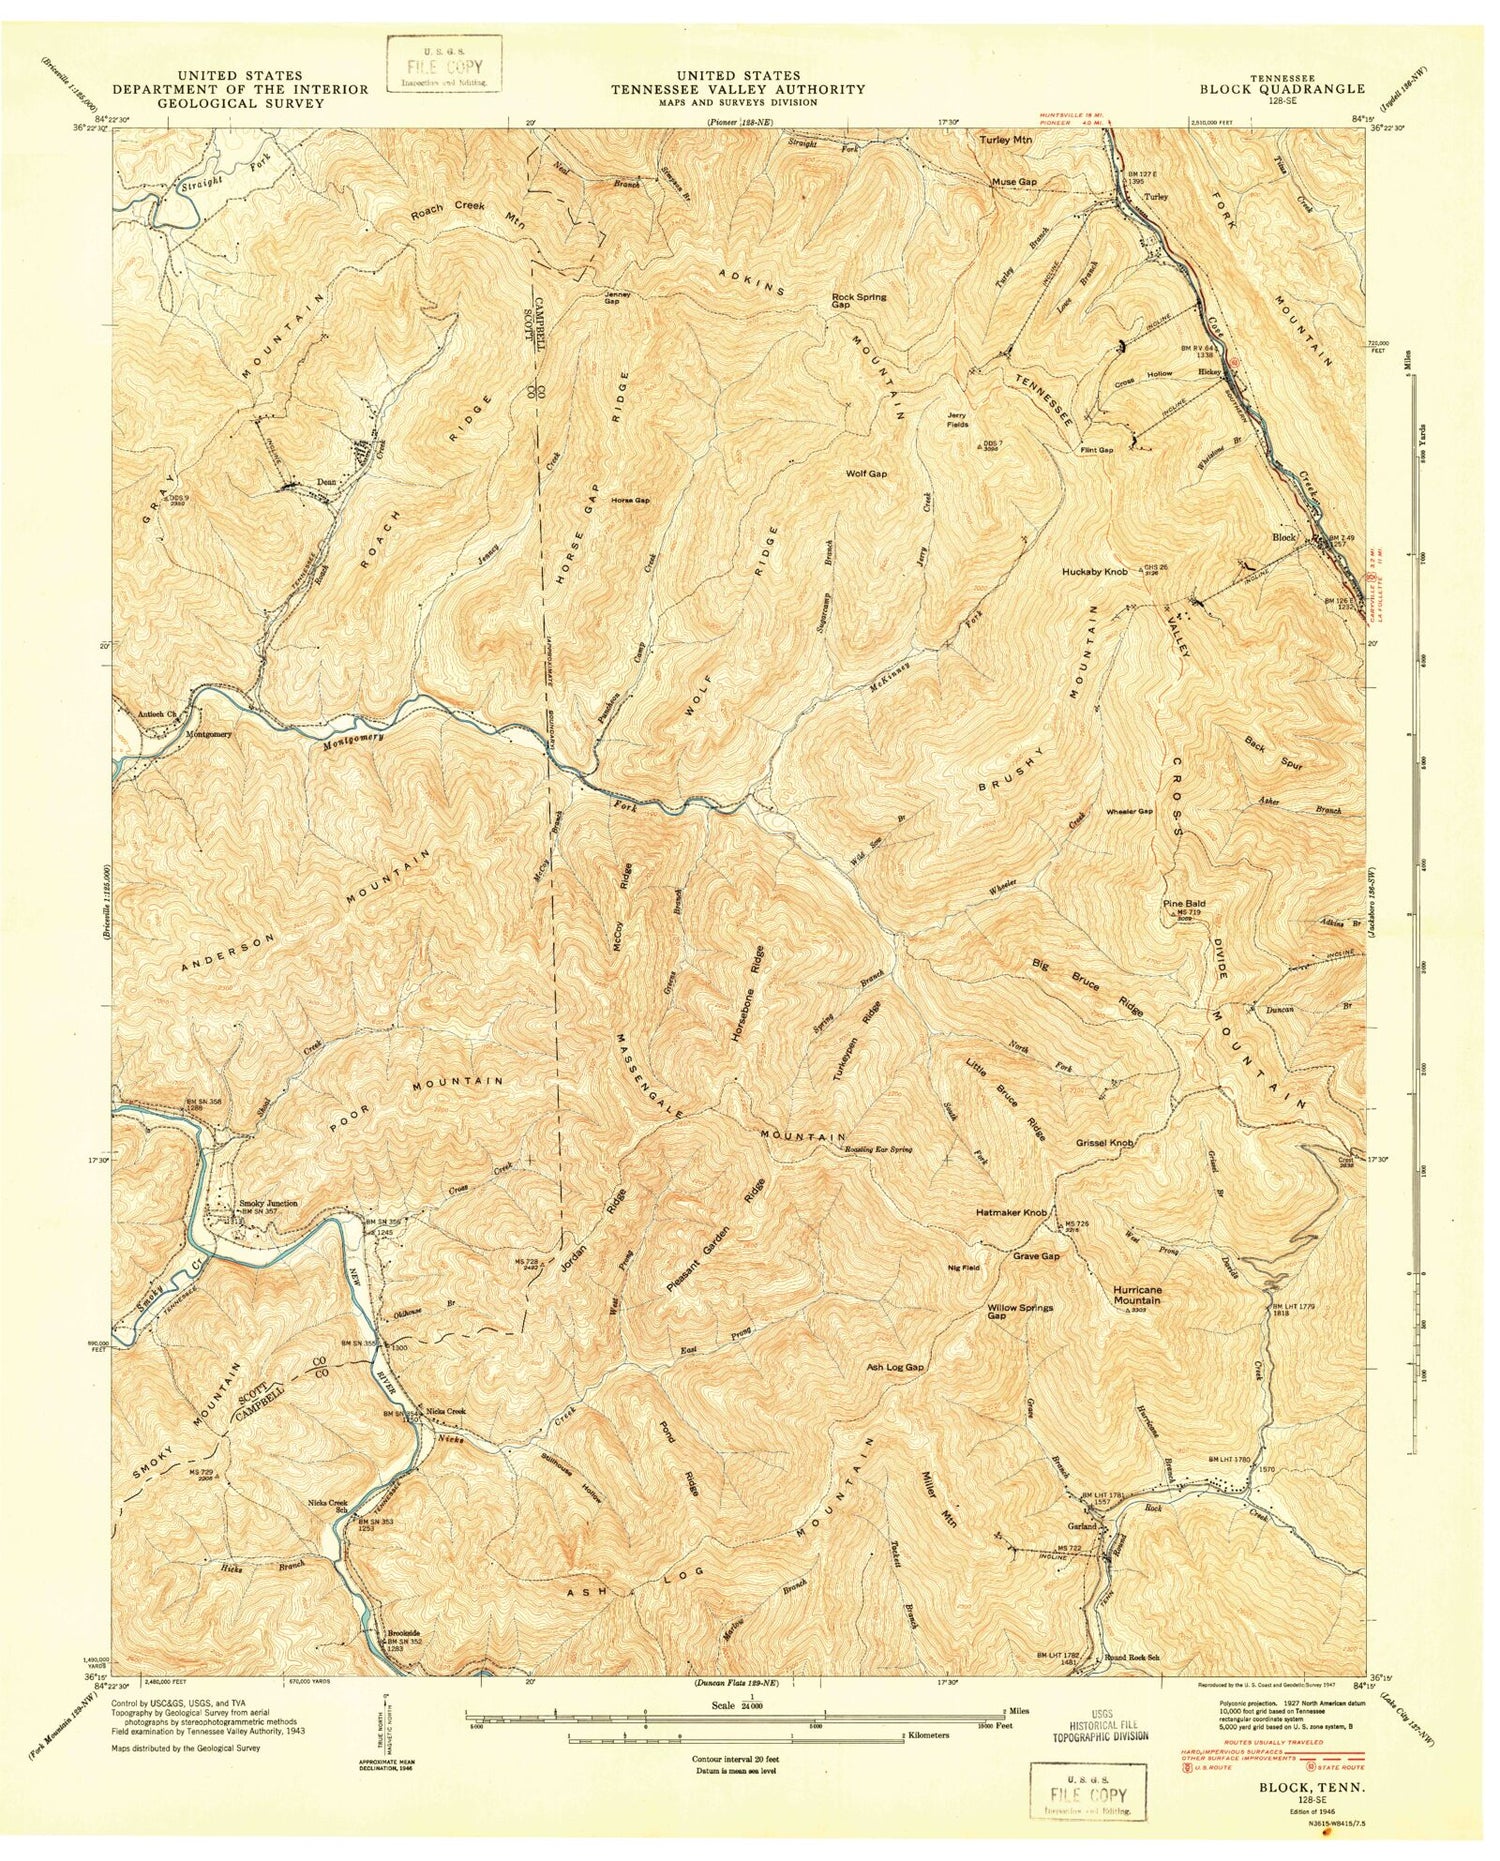 Classic USGS Block Tennessee 7.5'x7.5' Topo Map Image